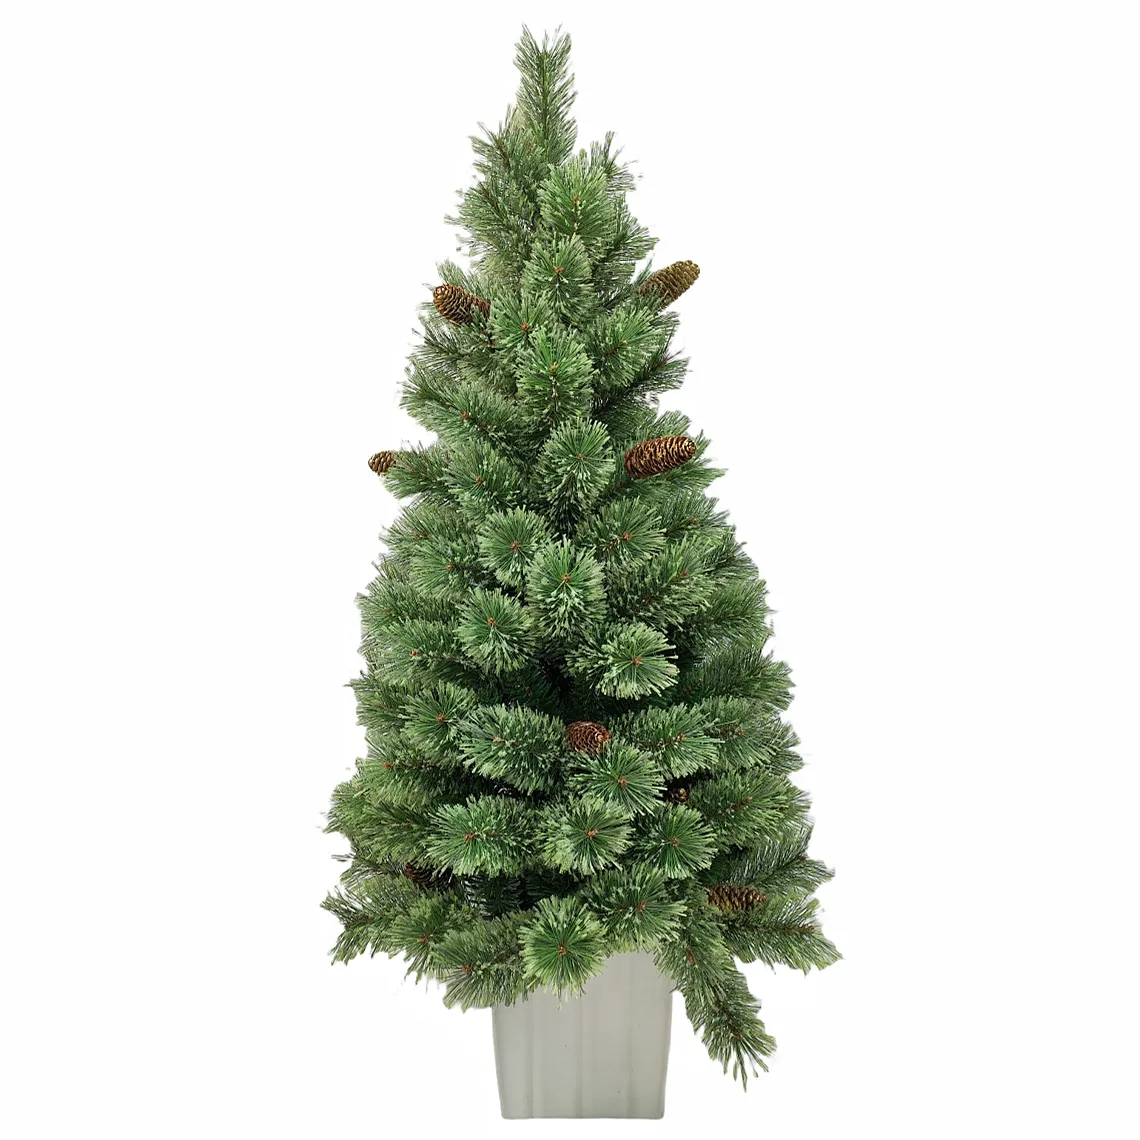 Indoor Pvc Christmas Tree 4Ft Artificial Simple Style Potted Christmas Tree For Home Doorway Decoration